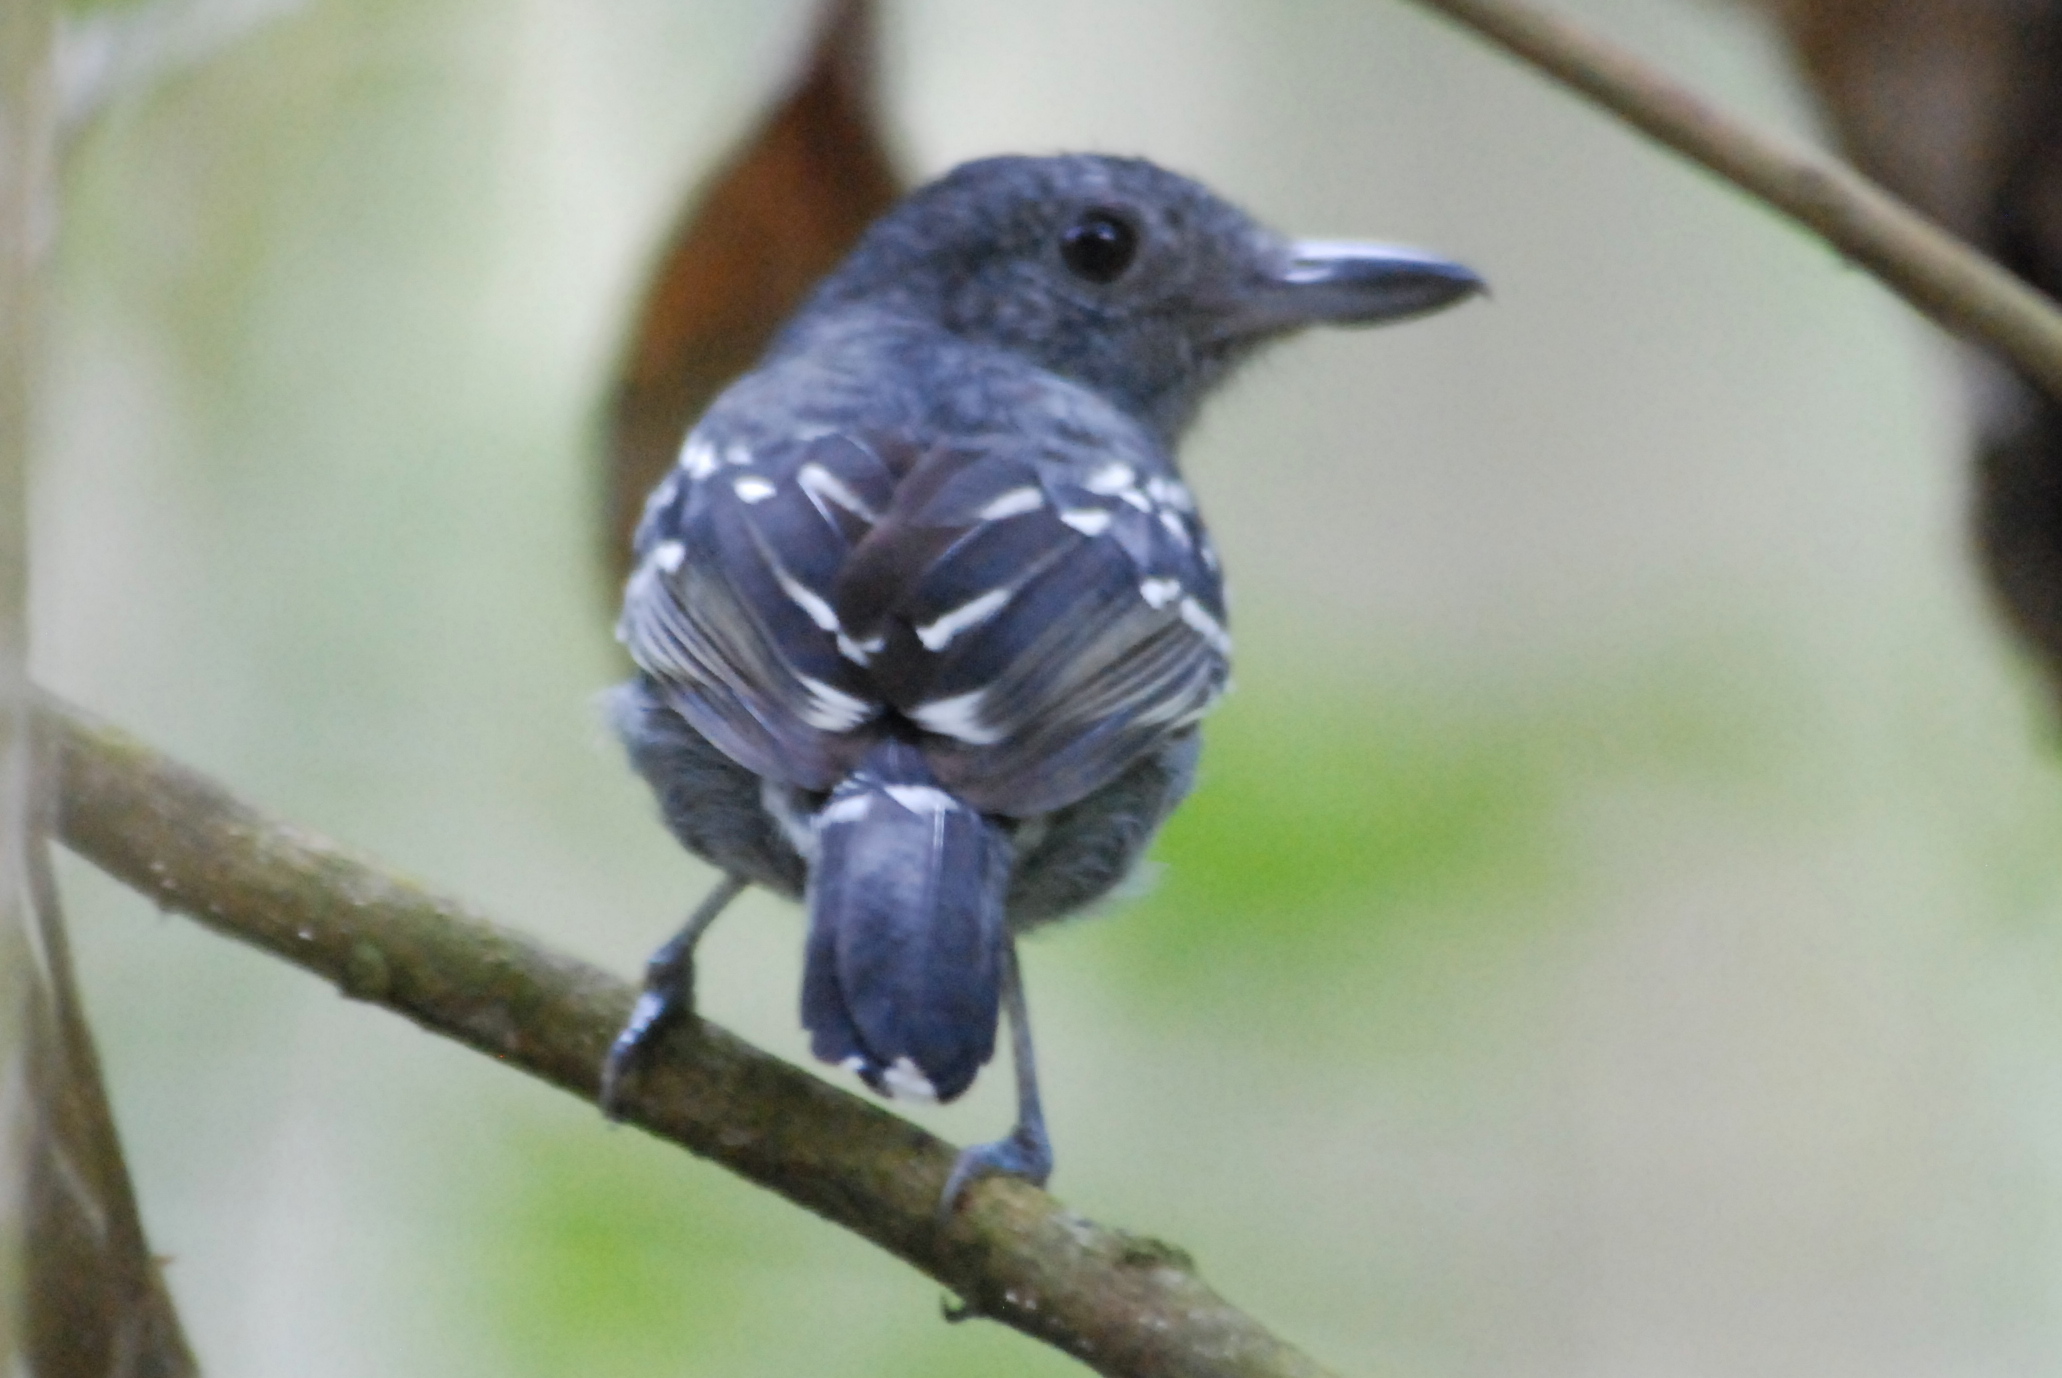 Click picture to see more Slaty Antshrikes.